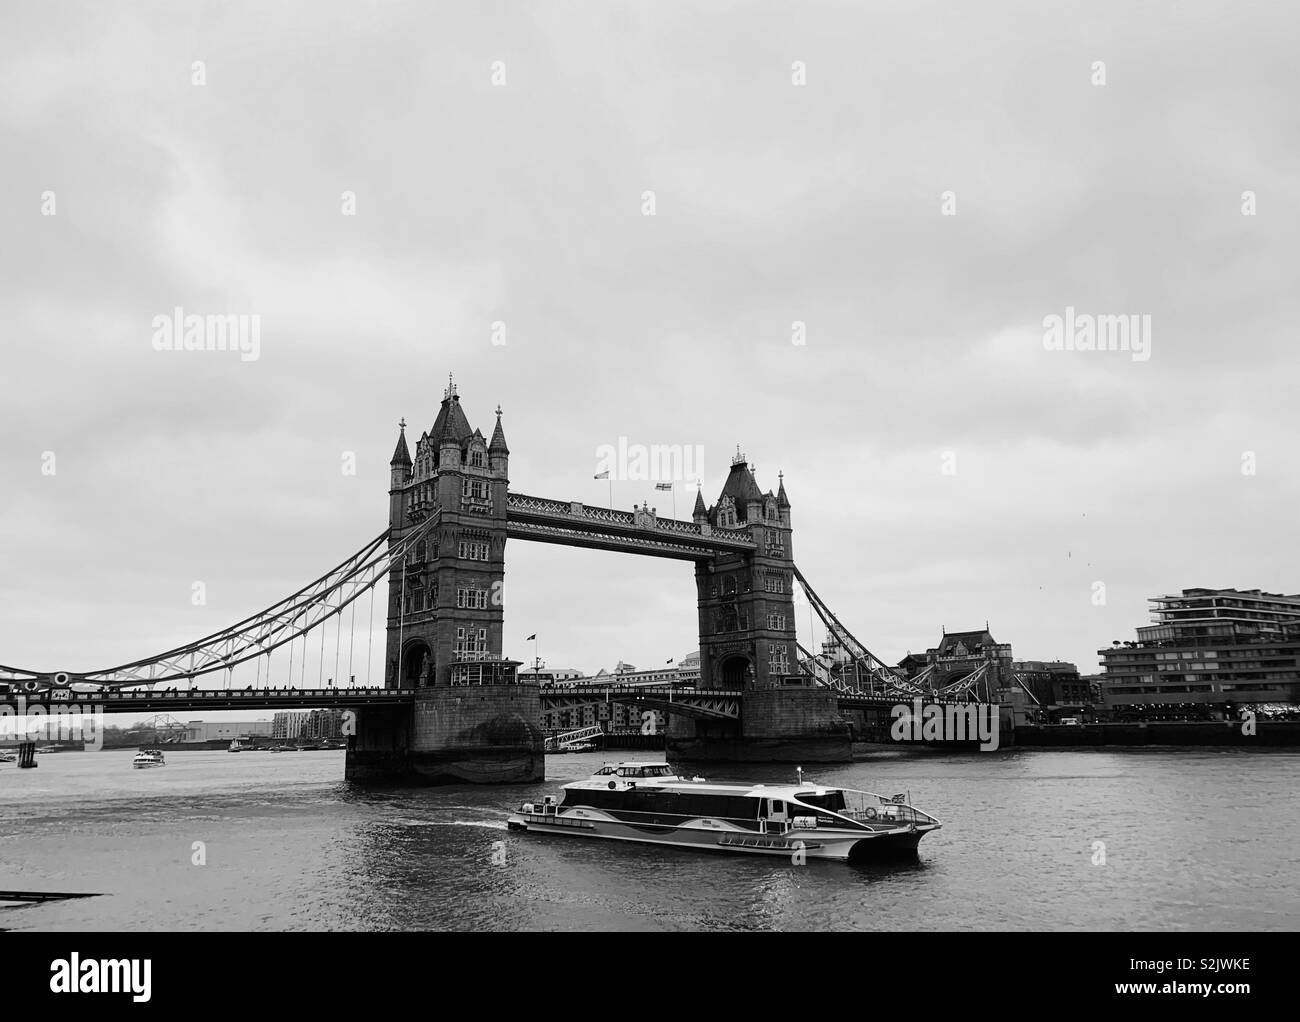 Tower Bridge is one of the London’s famous bridges and one of the must see landmarks in London. Stock Photo